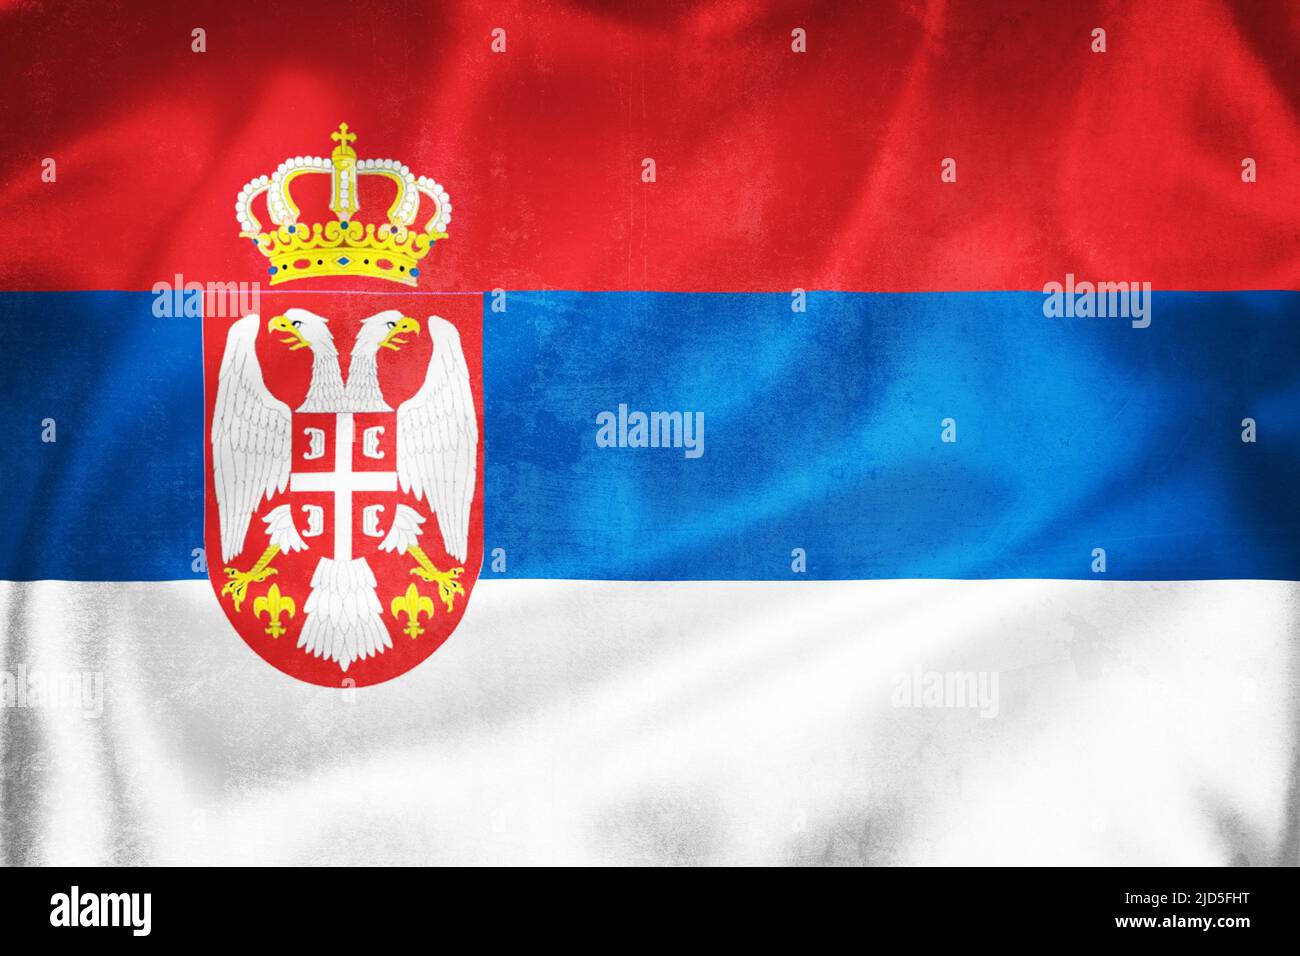 Grunge 3D illustration of Serbia flag, concept of Serbia Stock Photo